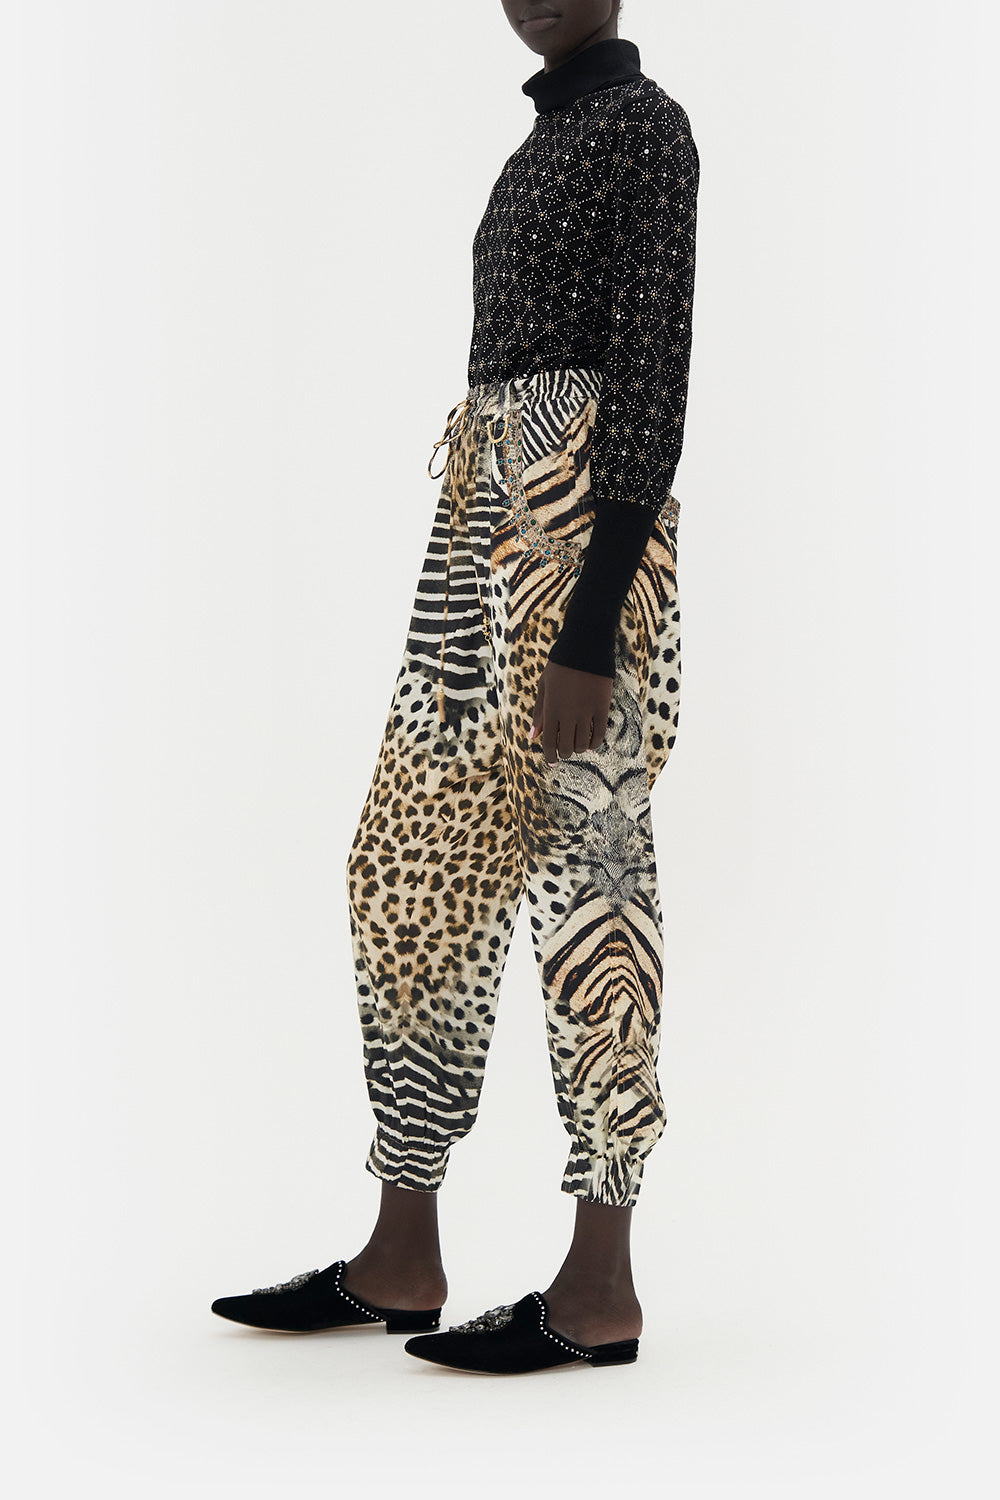 DROP CROTCH TRACK PANT FOR THE LOVE OF LEO